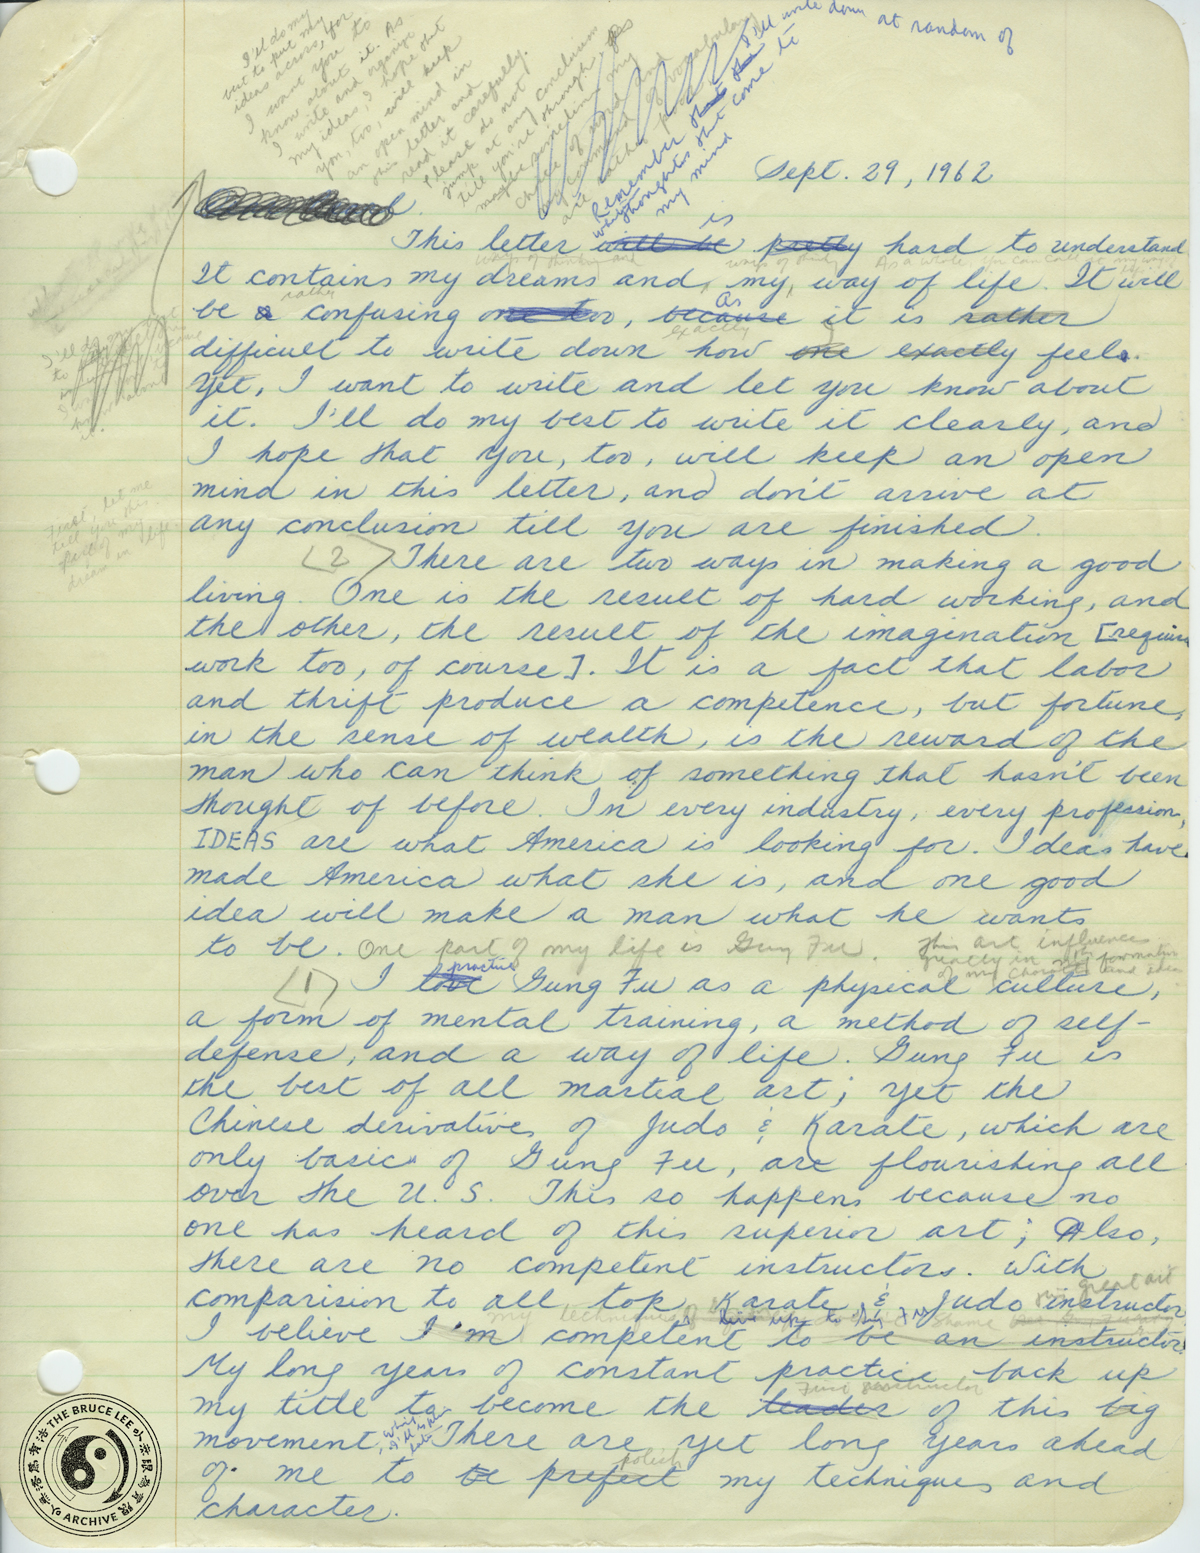 Letter-to-Pearl-draft-pg.1-archive.jpg